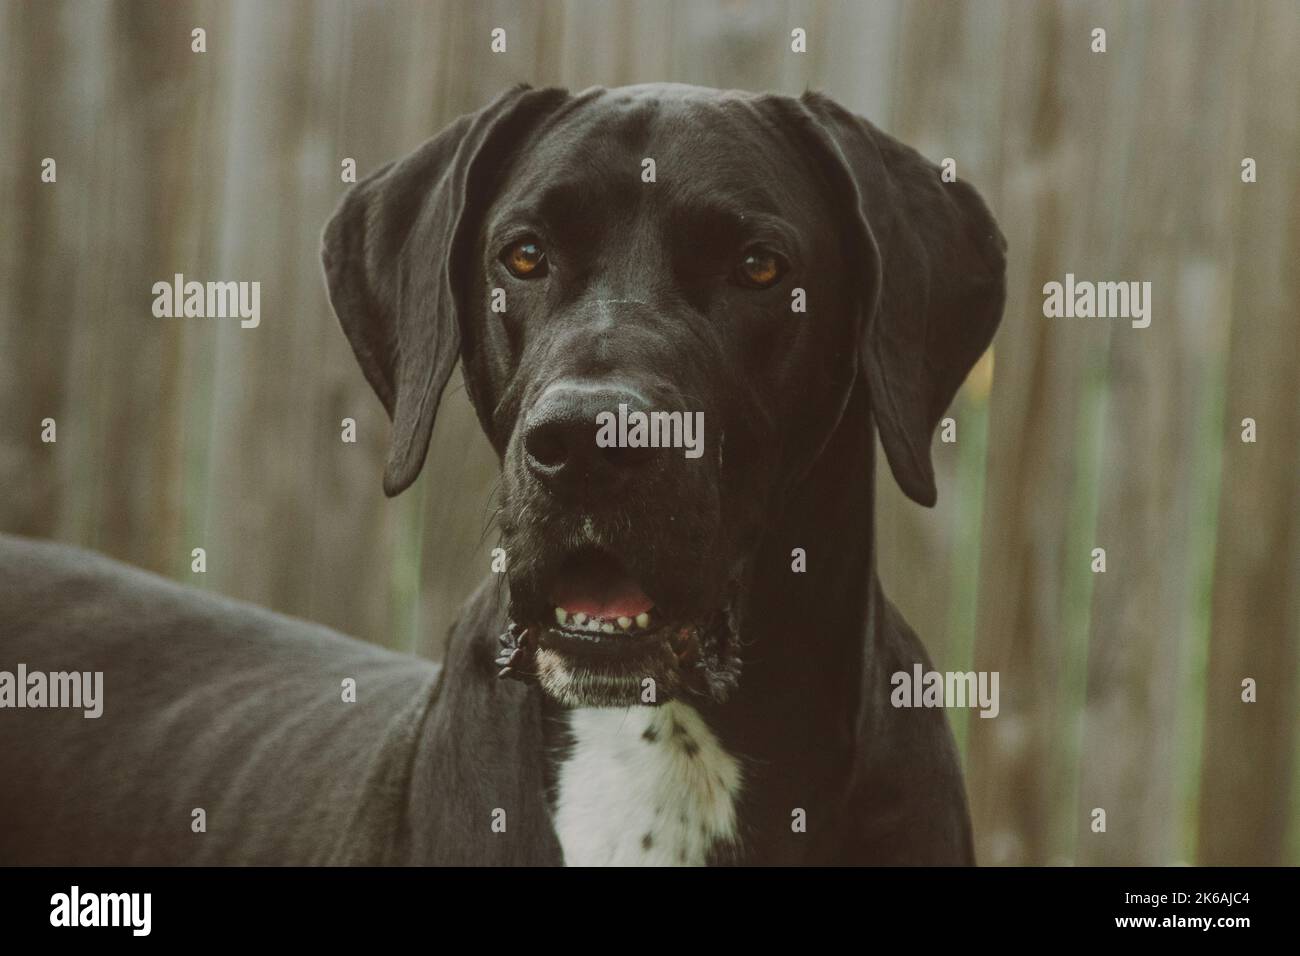 A portrait of a black Great Dane dog with an open mouth Stock Photo